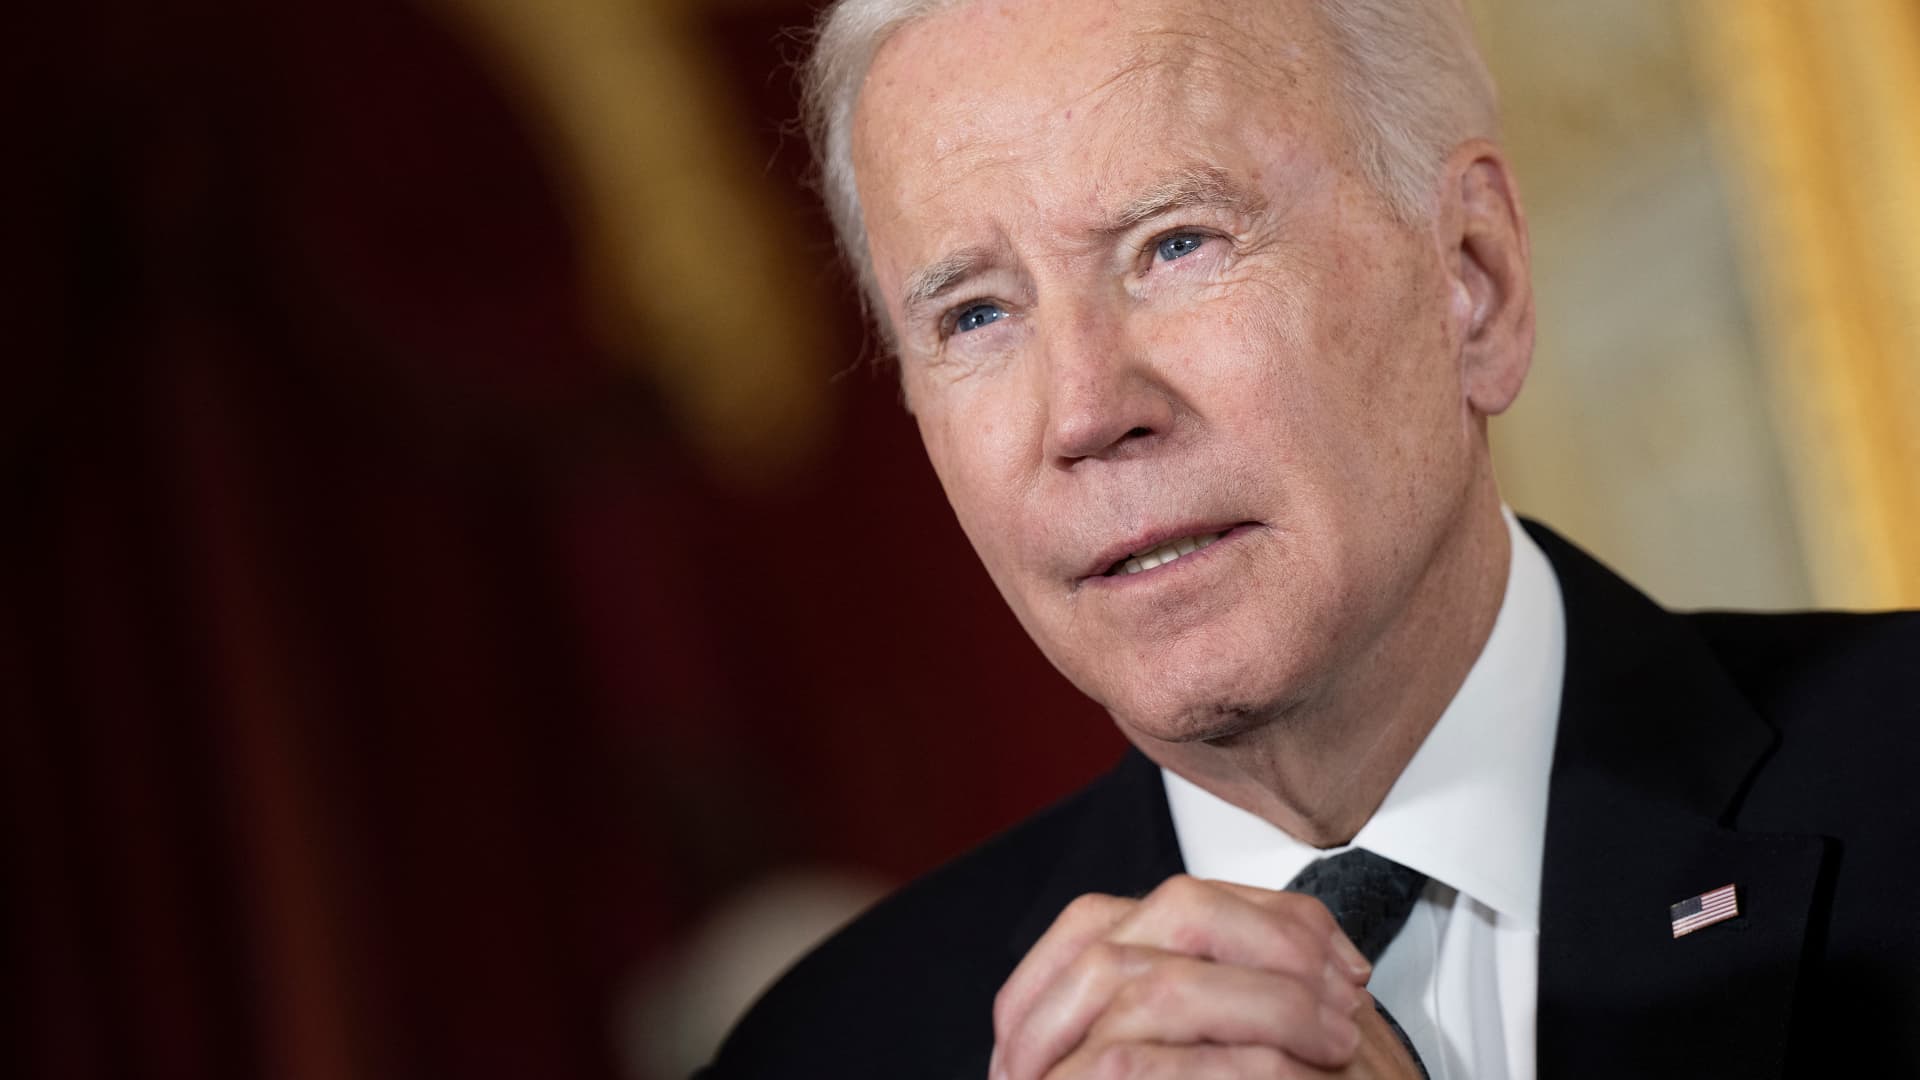 Biden says U.S. forces would defend Taiwan in the event of a Chinese invasion – CNBC